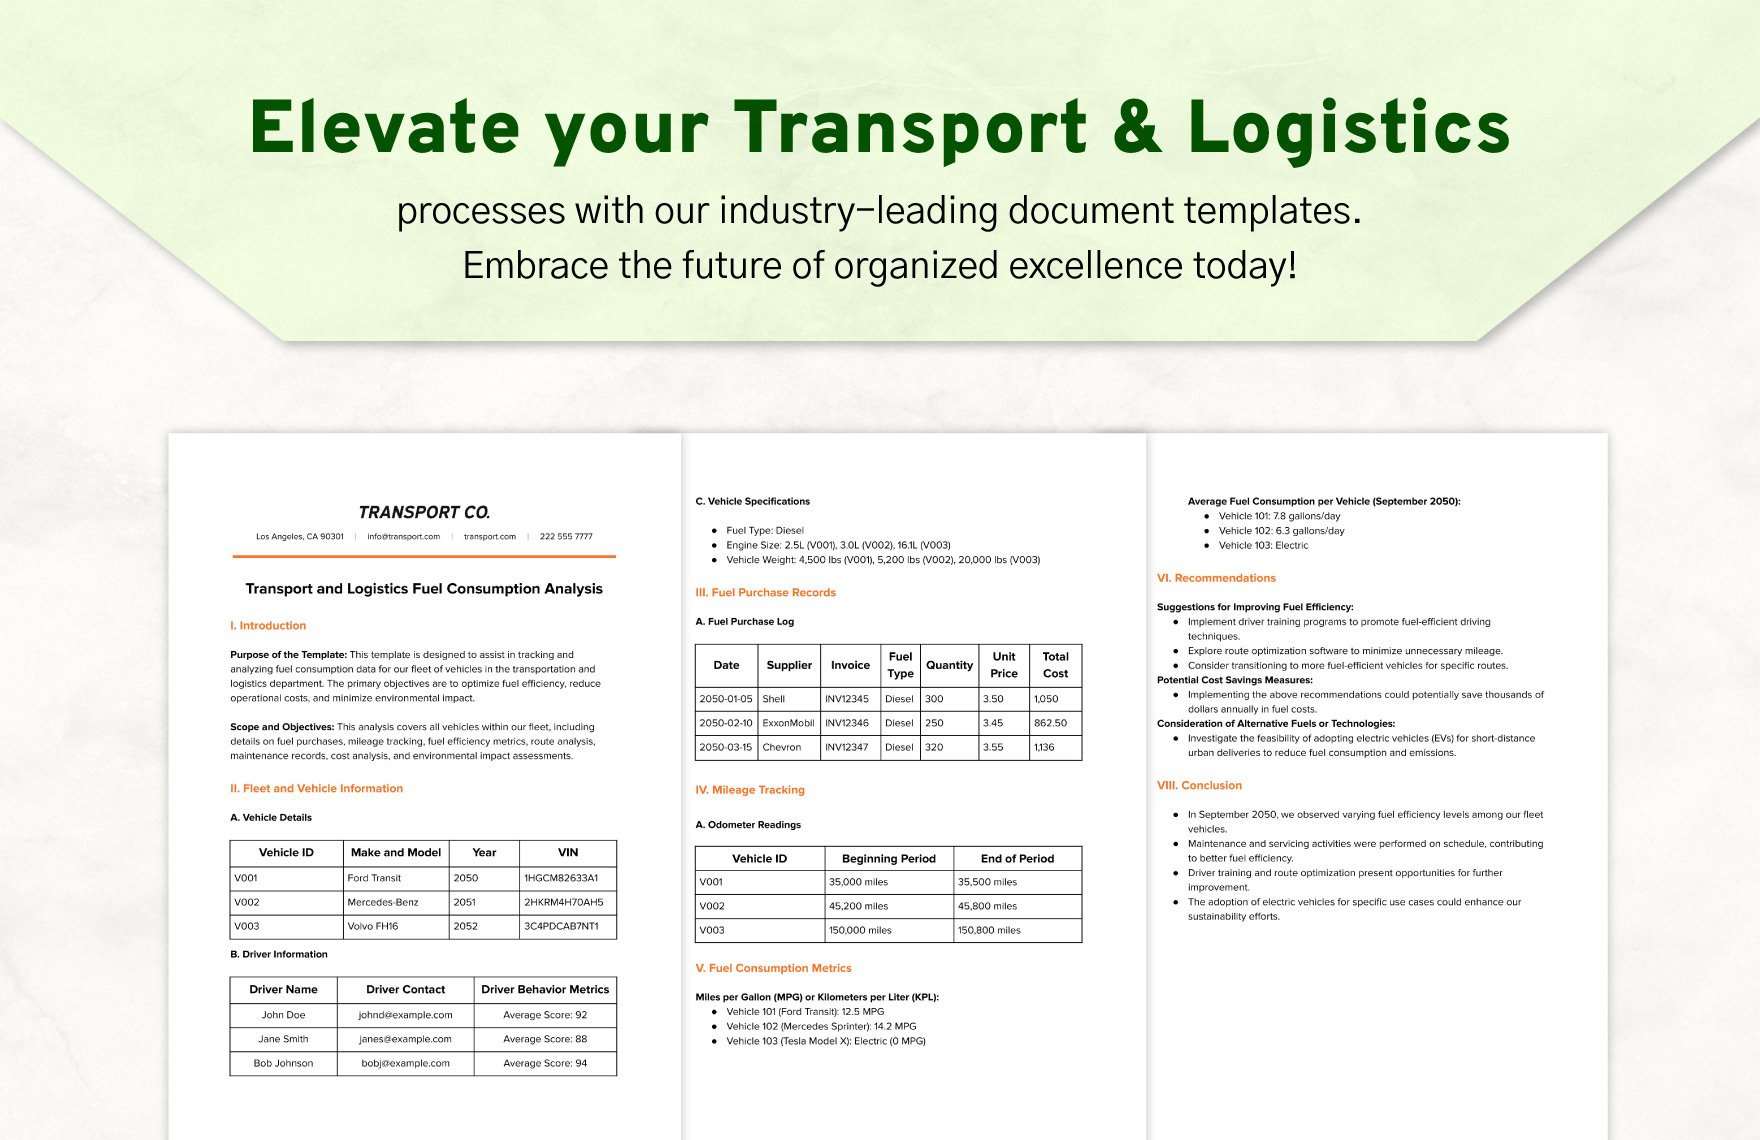 Transport and Logistics Fuel Consumption Analysis Template